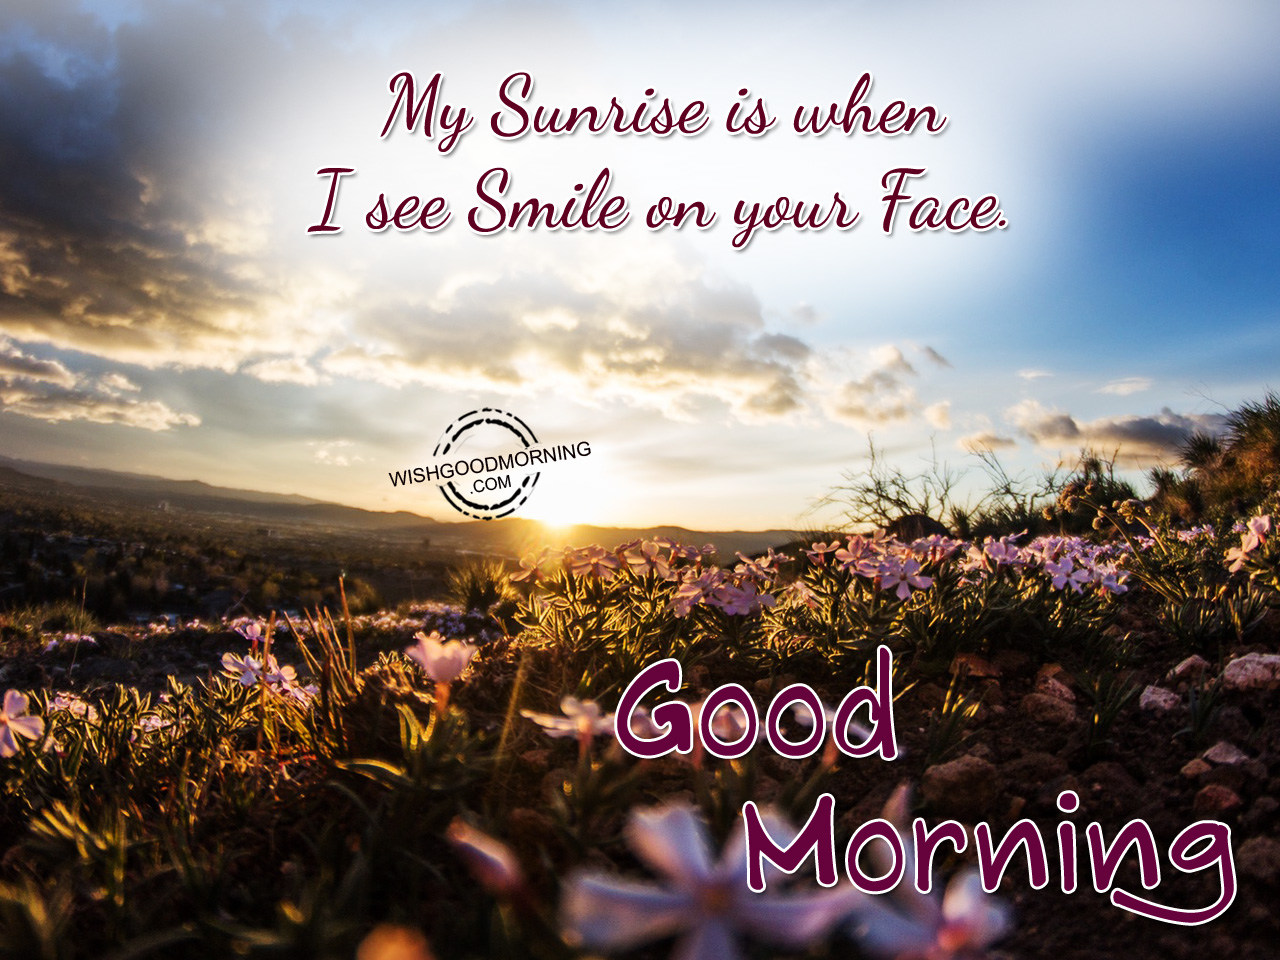 Good Morning-My Sunrise Is When I See Smile On Your Face. - Good ...